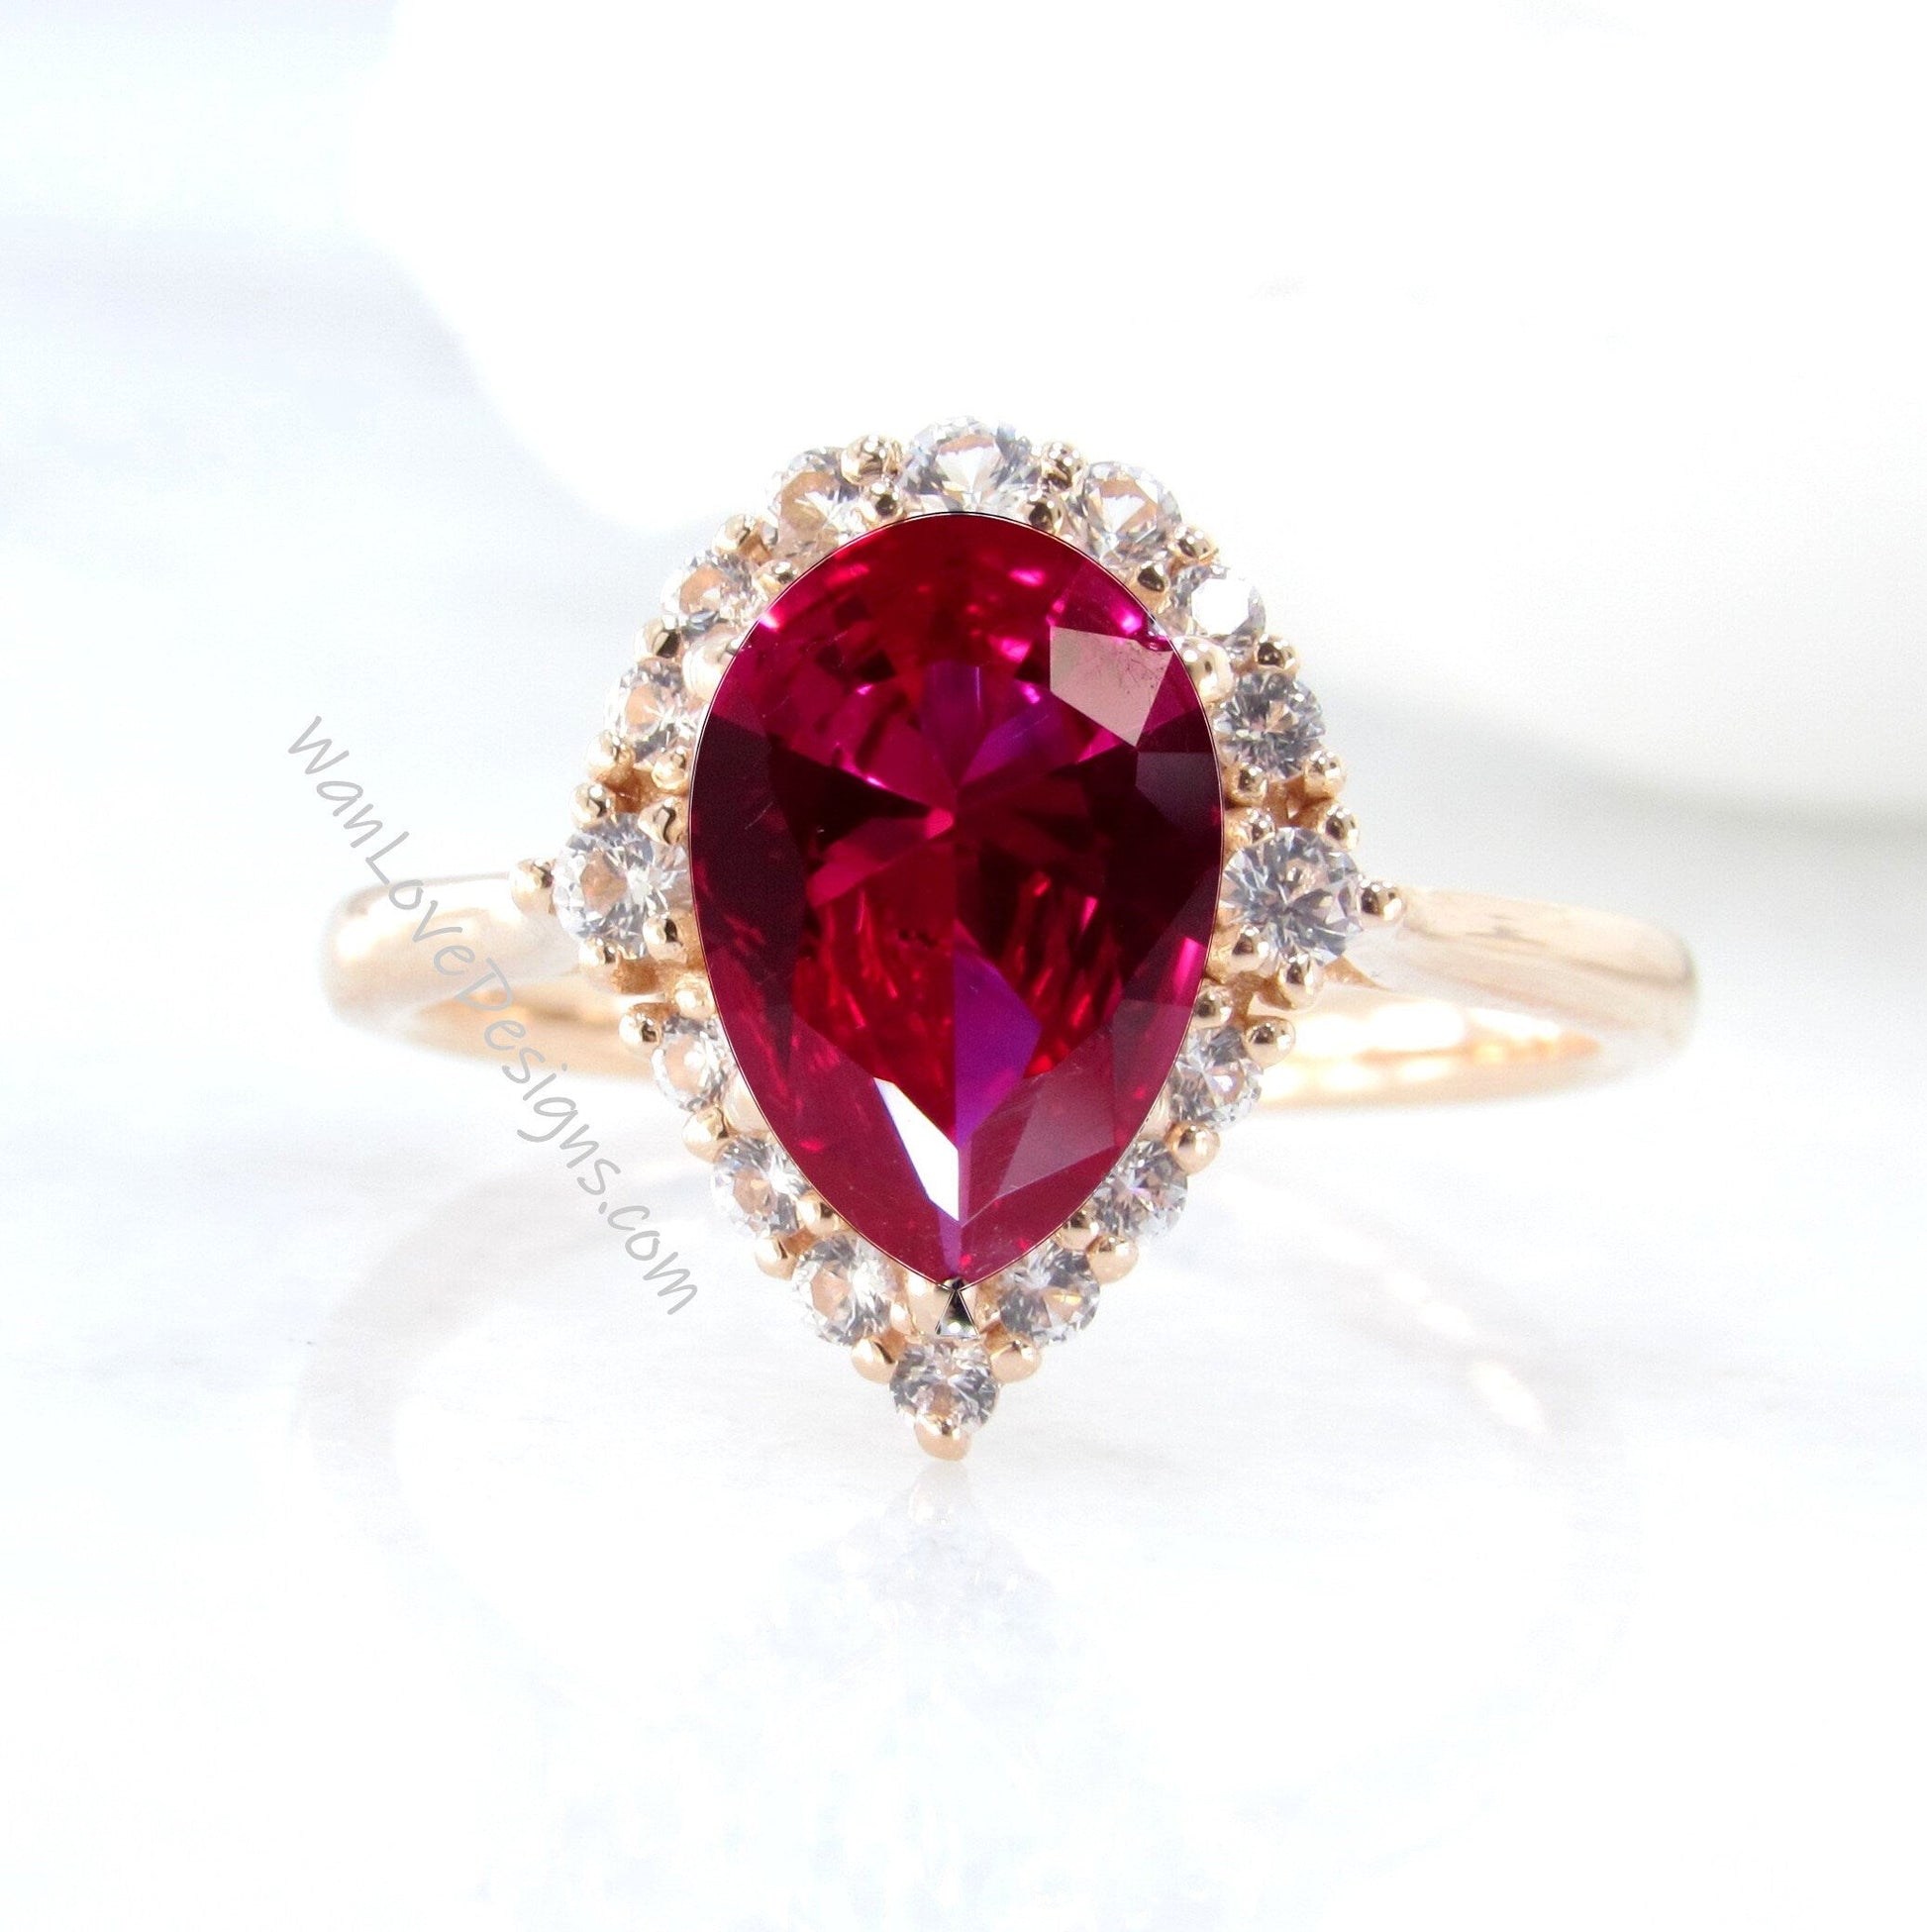 Pear cut Ruby engagement ring rose gold vintage tapered diamond graduated halo bridal ring antique wedding promise anniversary ring Wan Love Designs